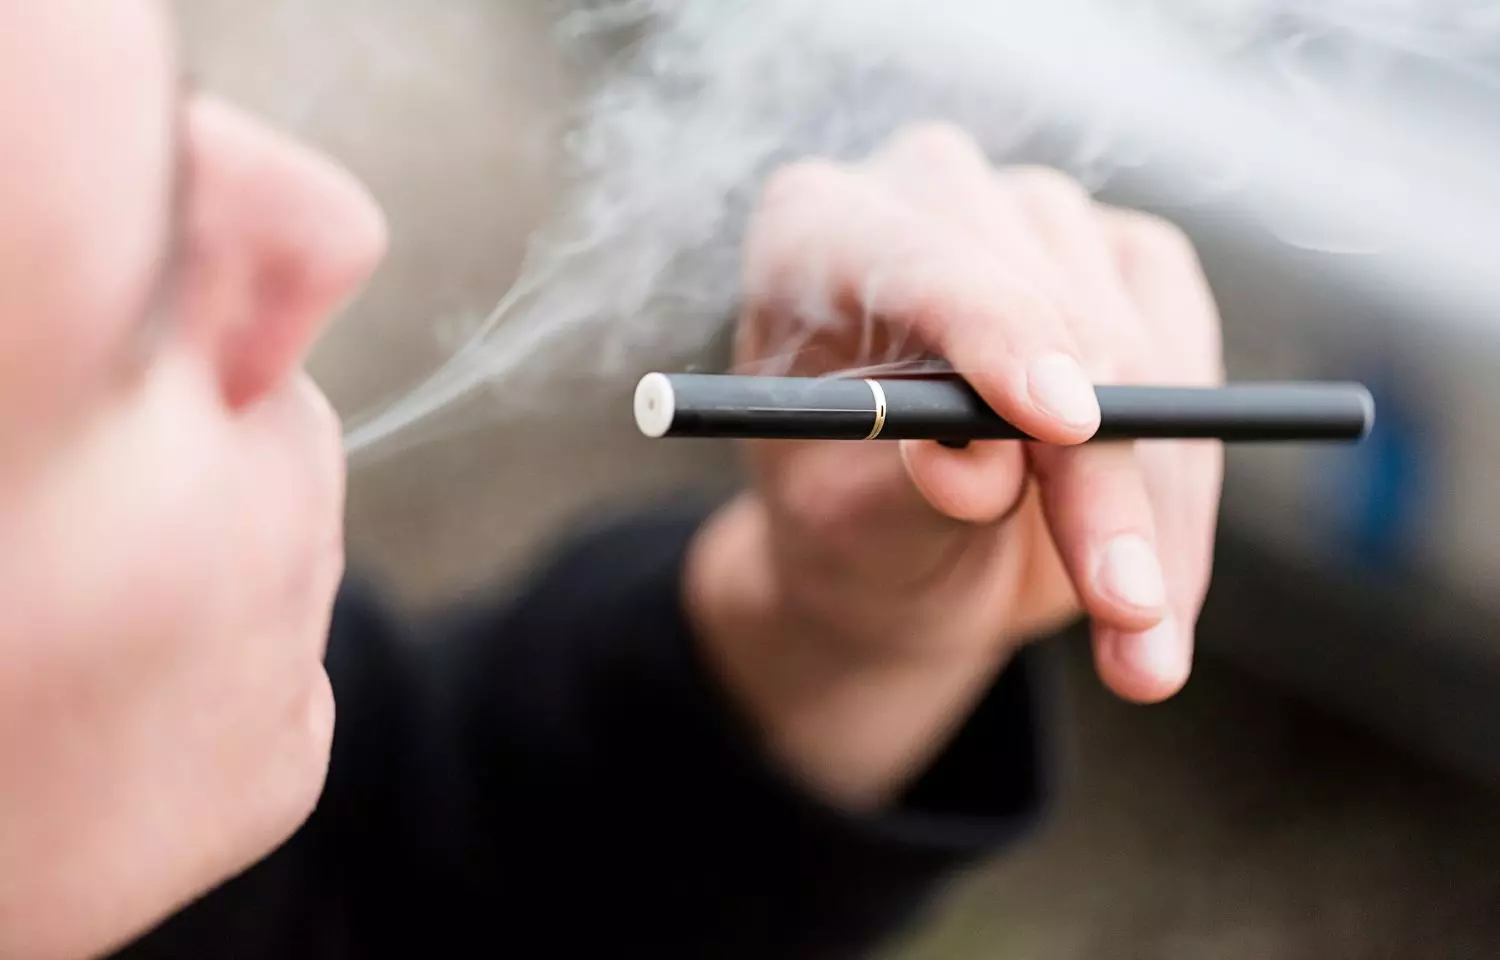 E-cigarette use among adolescents linked to lifetime risk of CVD and pulmonary diseases